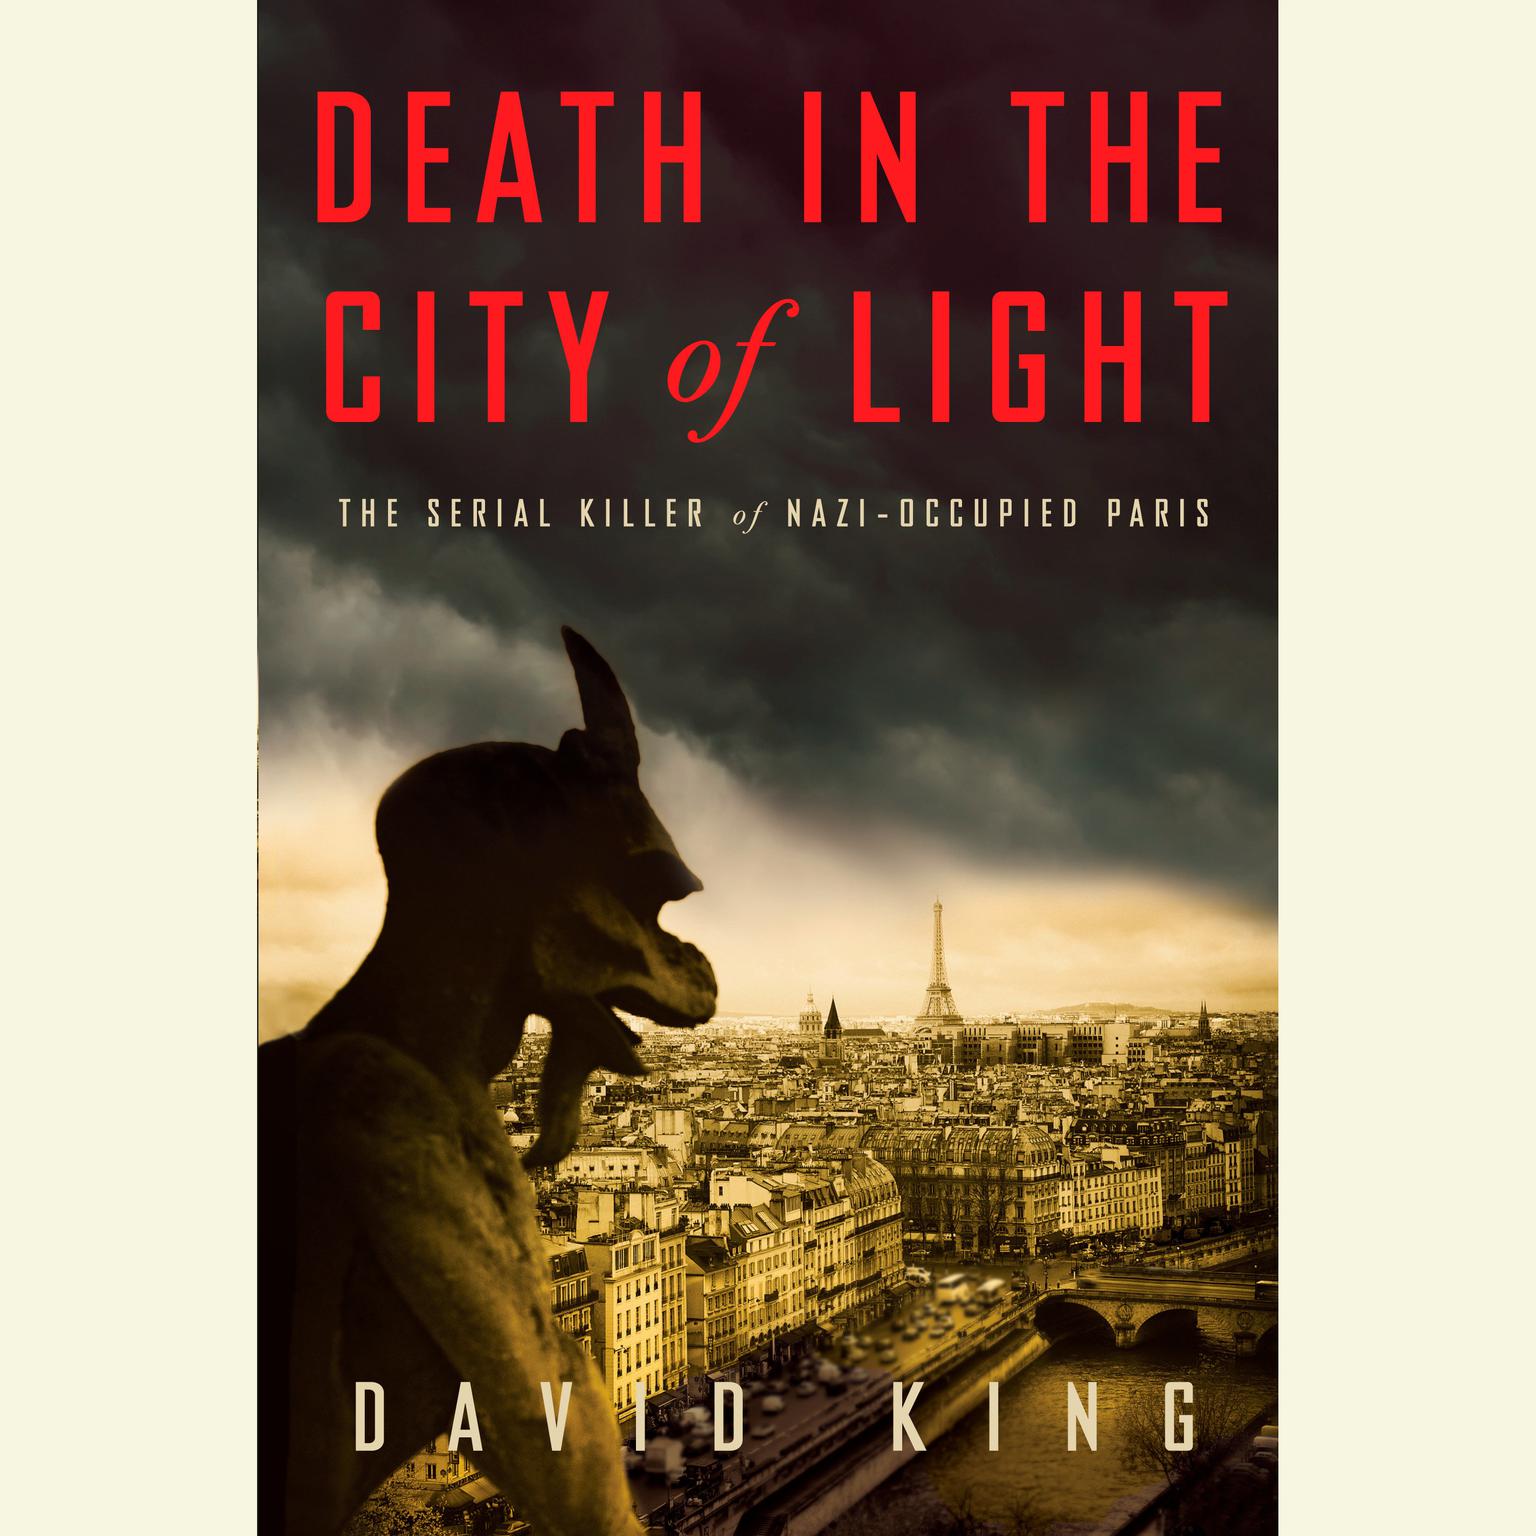 Death in the City of Light: The Serial Killer of Nazi-Occupied Paris Audiobook, by David King